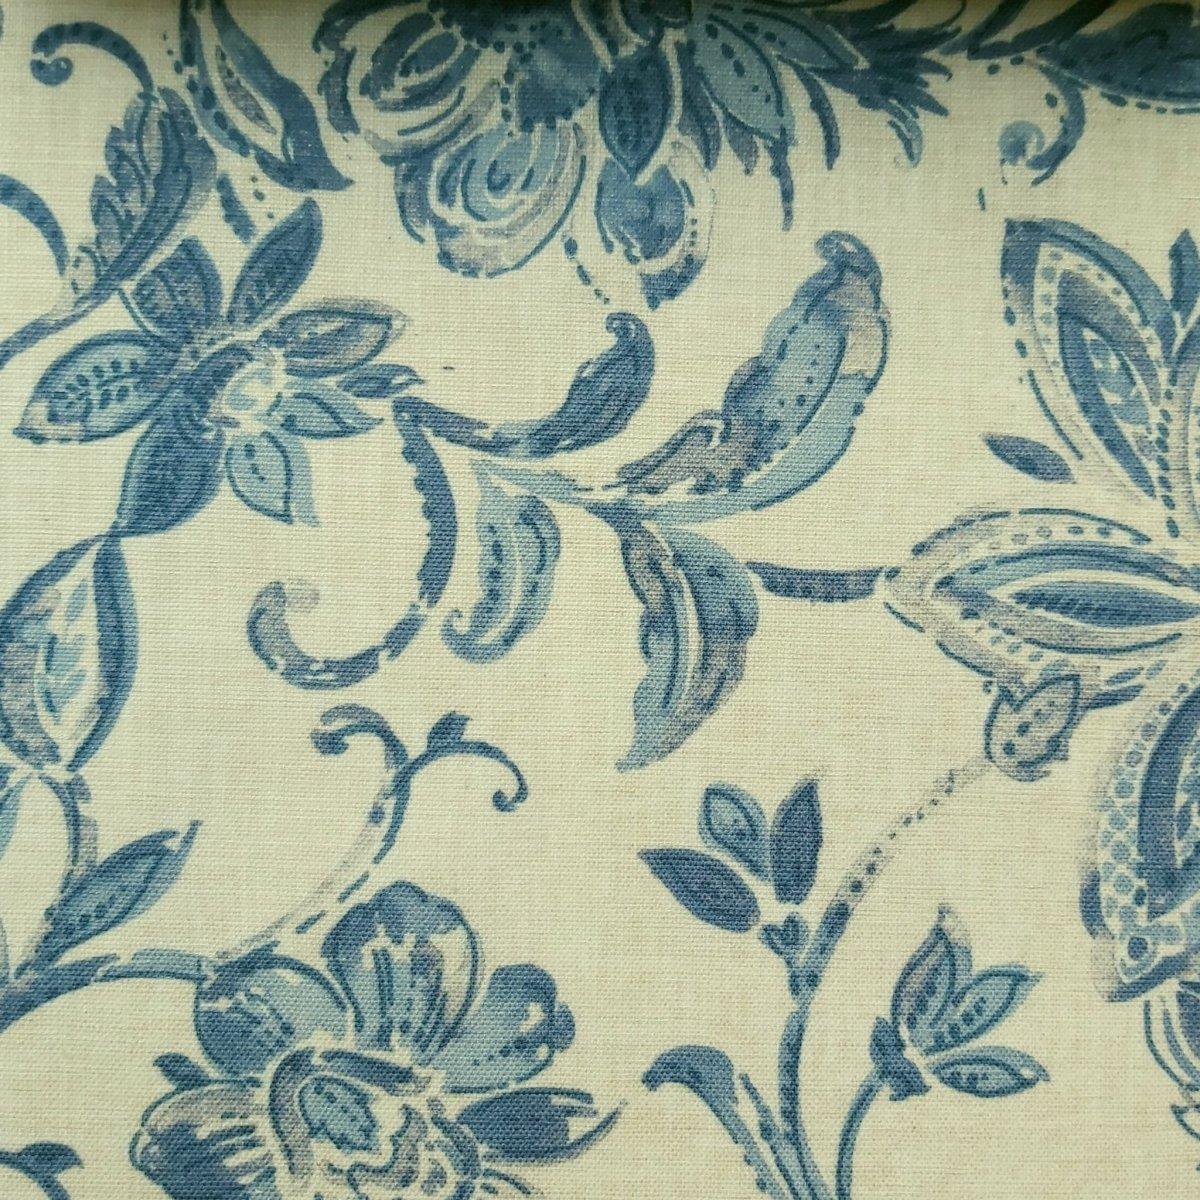 Flowered fabric for  sofas cushions curtains.